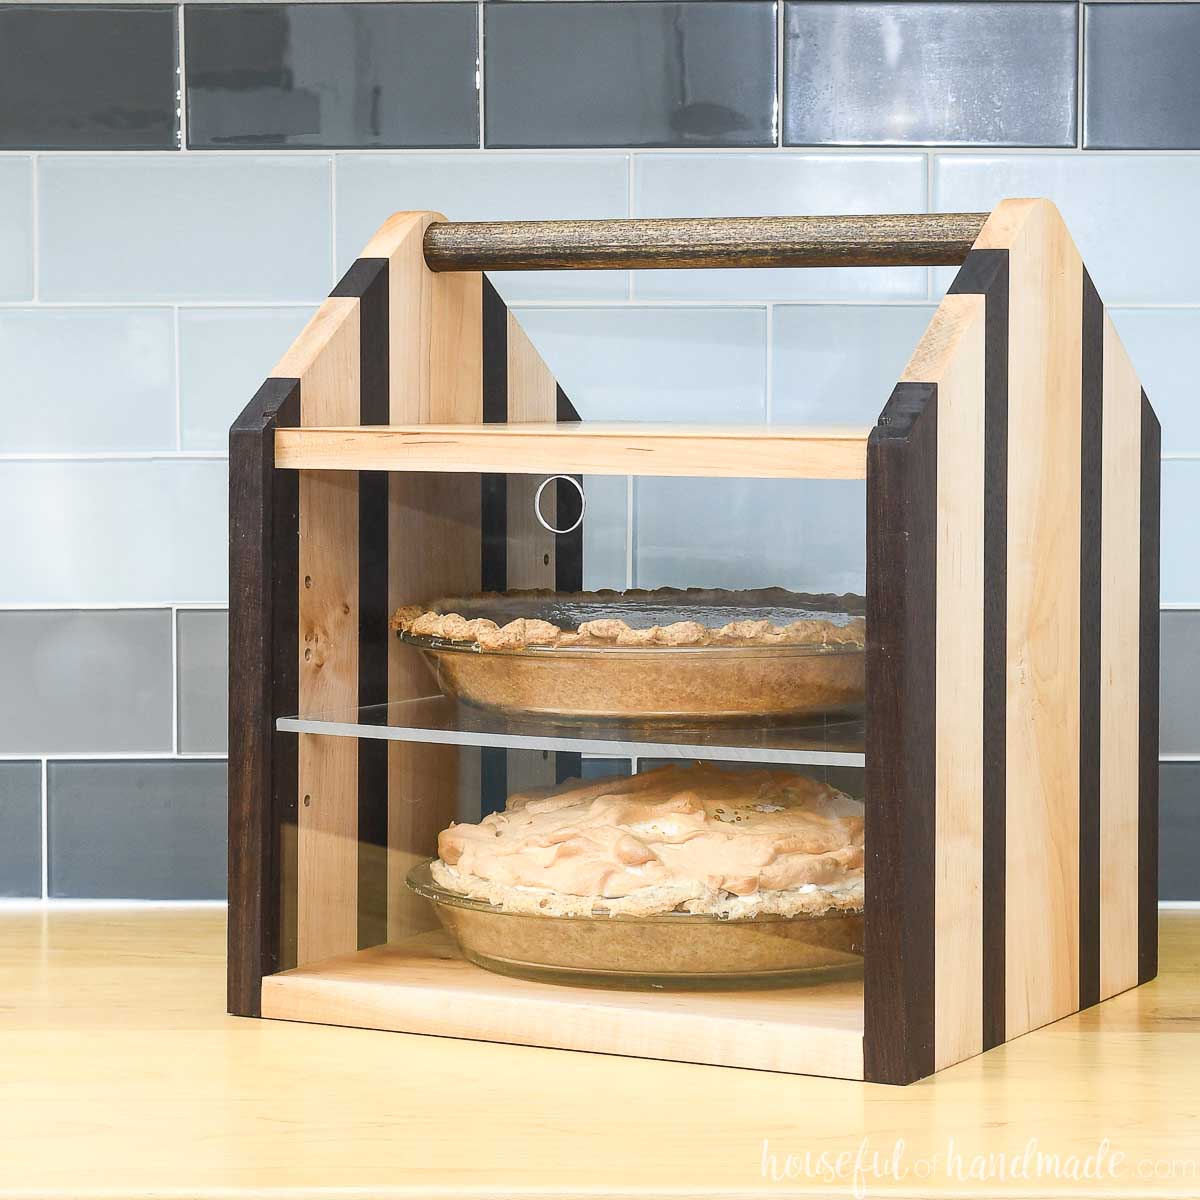 Wood pie carrier with room for 2 pies, dowel handle, and acrylic front on a counter with 2 pies in it.